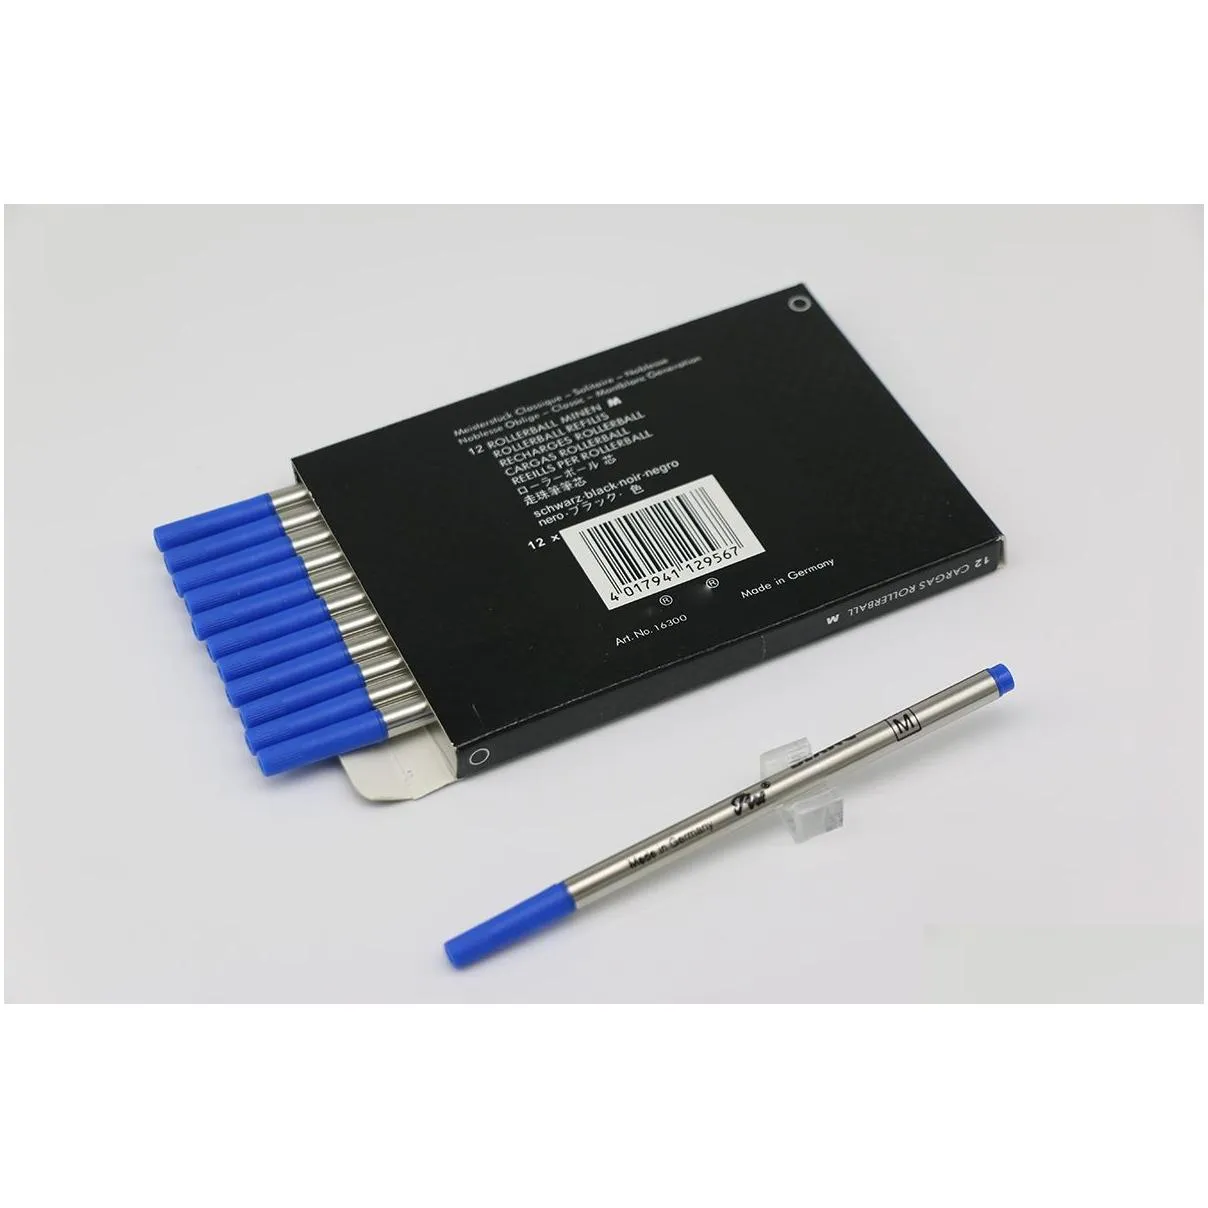 wholesale A Lot of 12 Pcs Rollerball Pen Black/Blue 710 Refills Medium Point can mixed collocation with lid